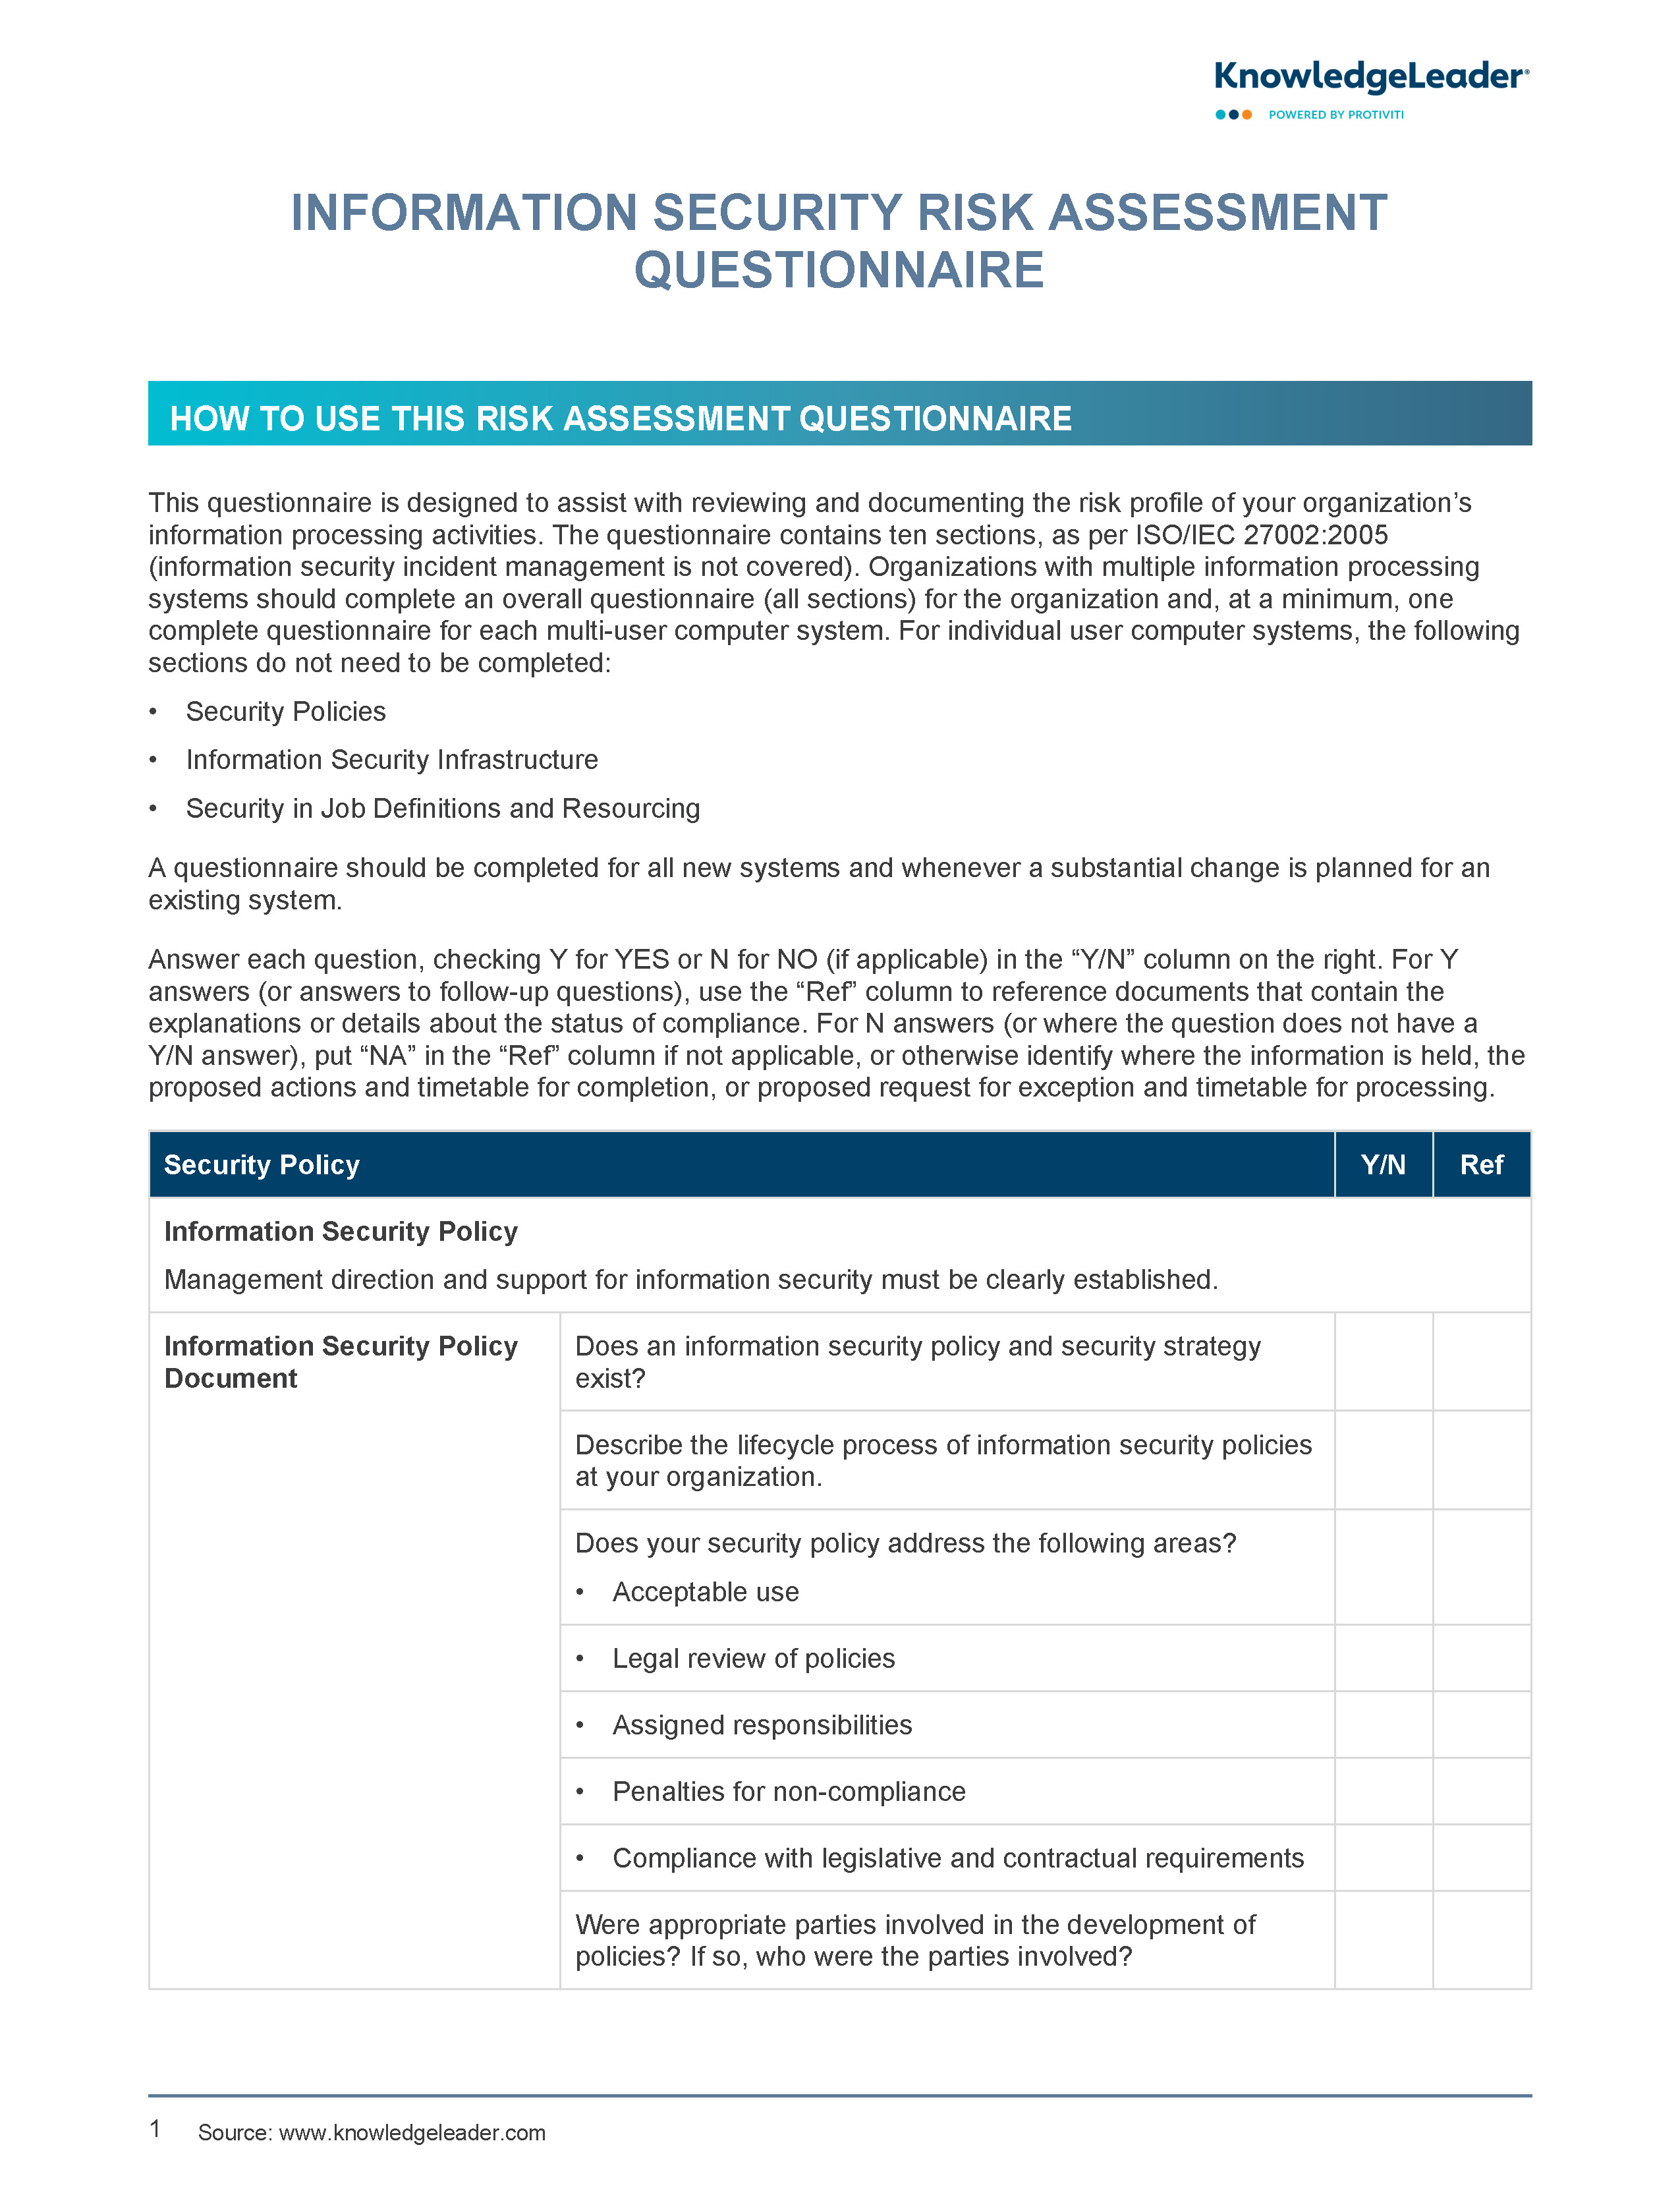 Screenshot of the first page of Information Security Risk Assessment Questionnaire